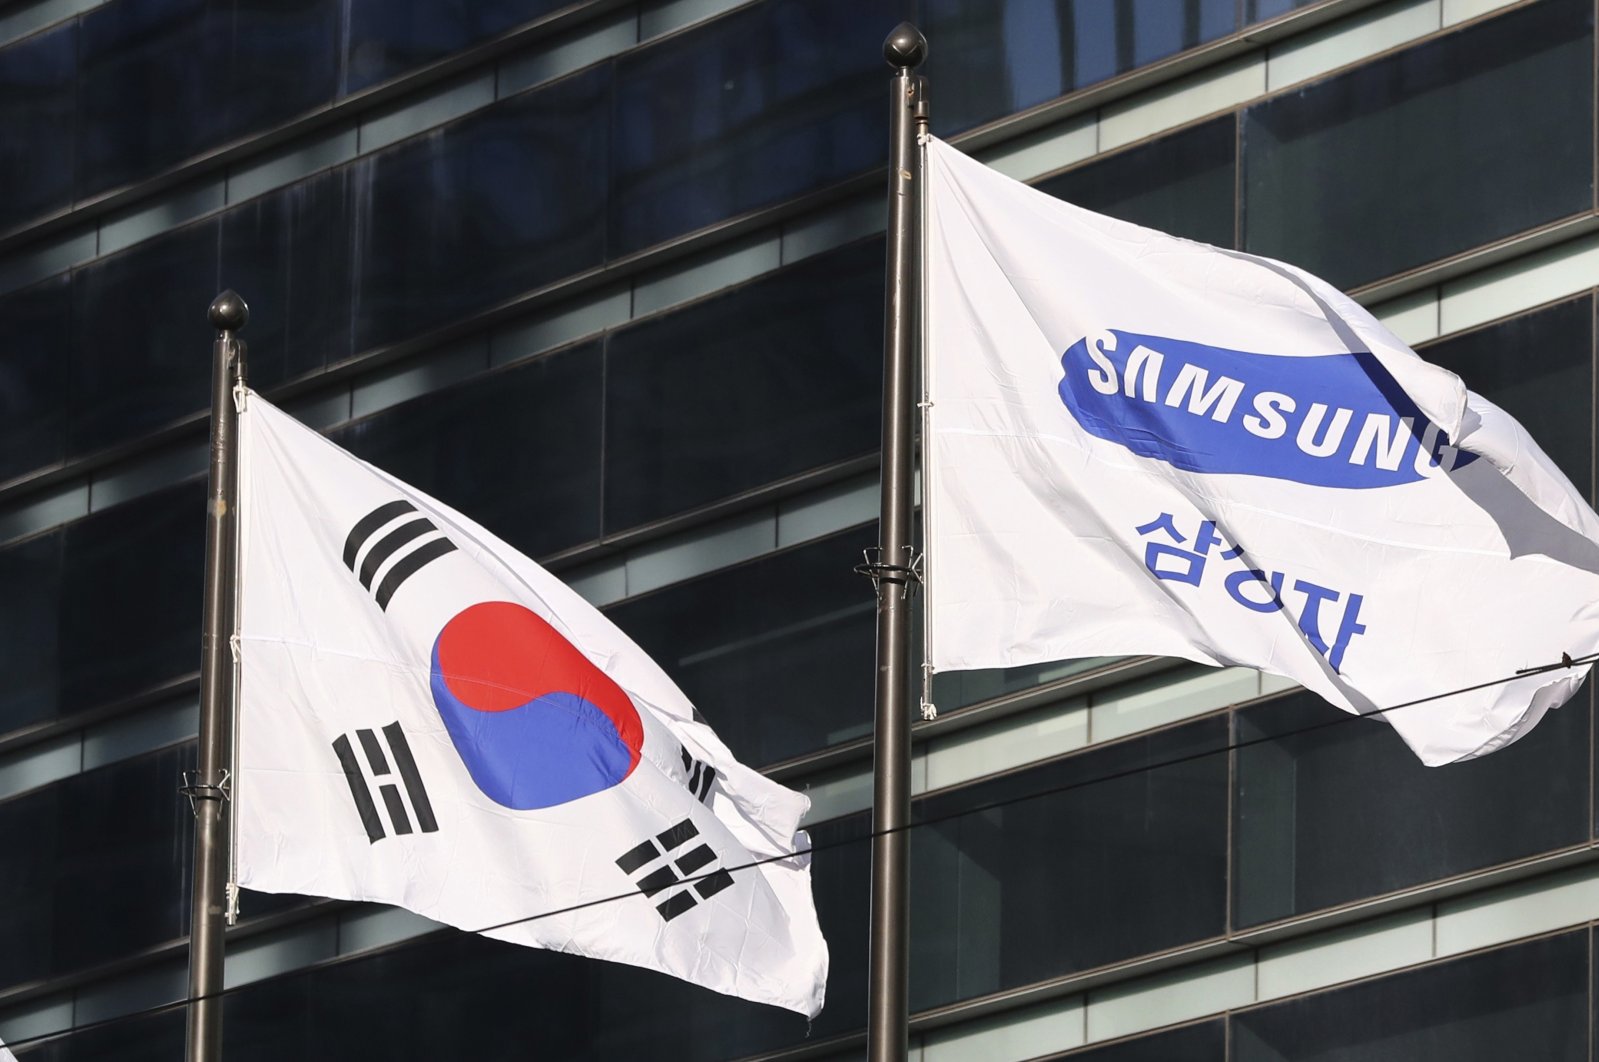 The company flag of Samsung Electronics (R) flutters next to the South Korean national flag in Seoul, South Korea, Jan. 16, 2017. (AP Photo)